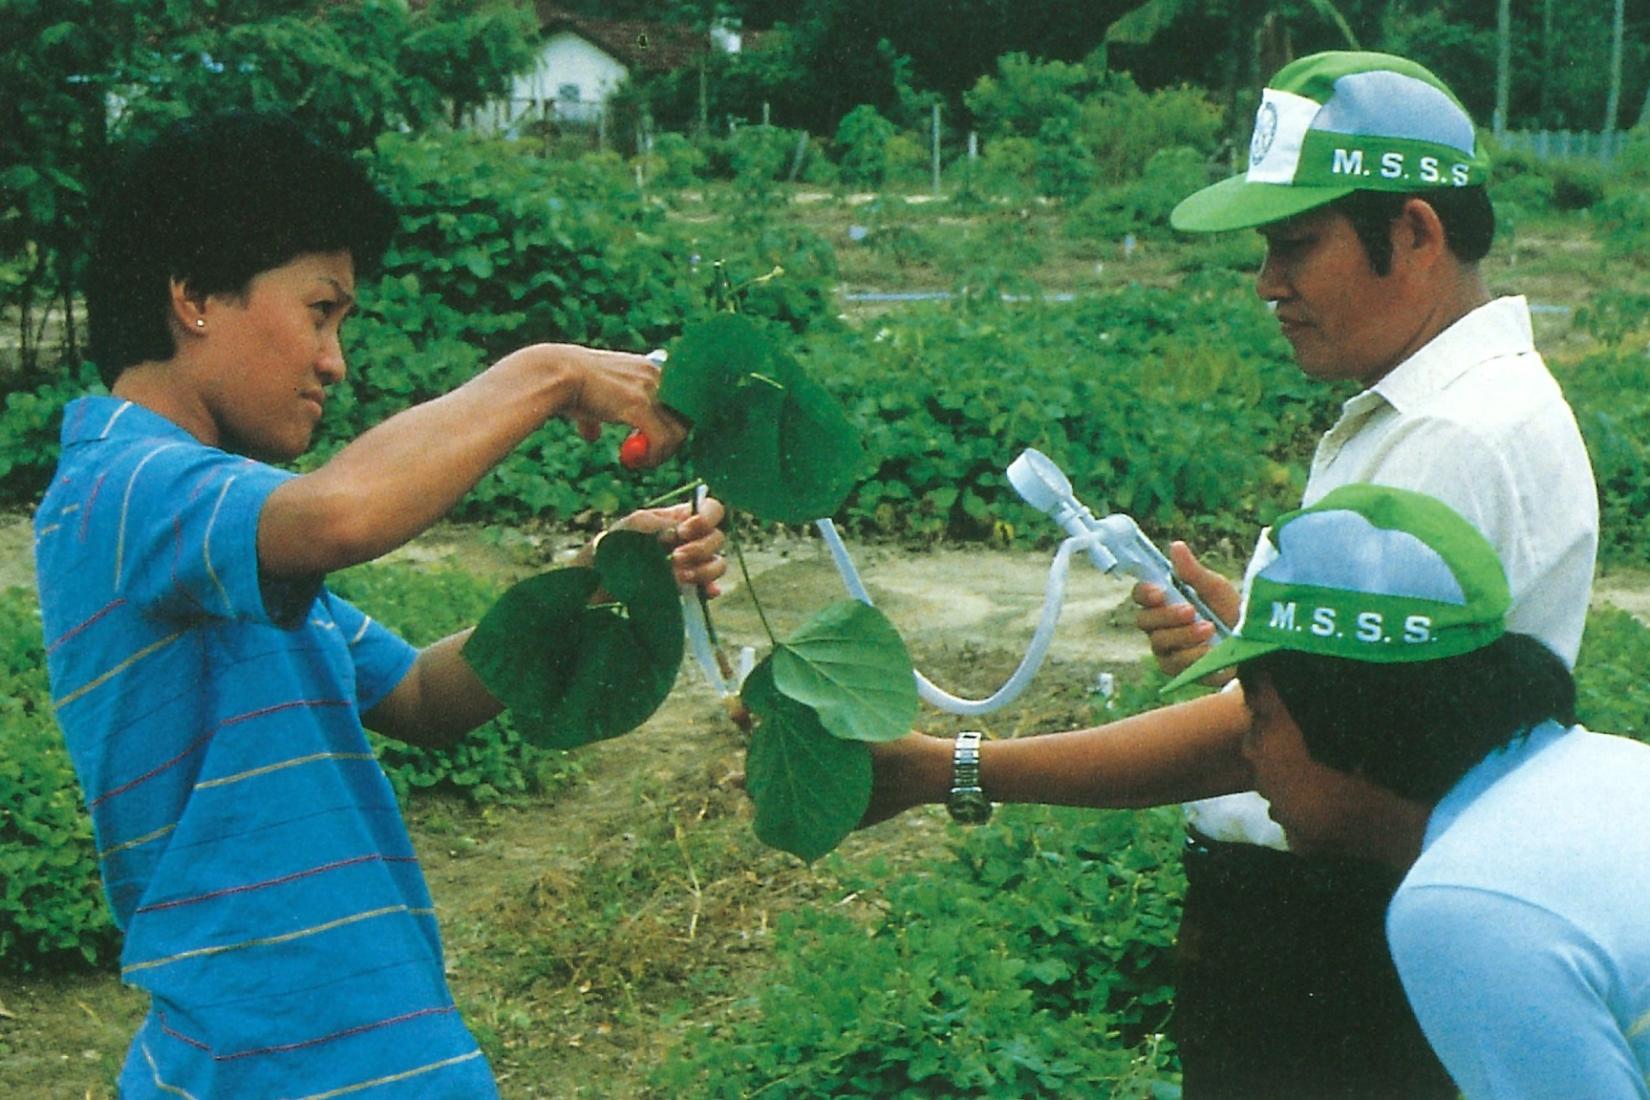 3 researchers performing test on a plant in a field